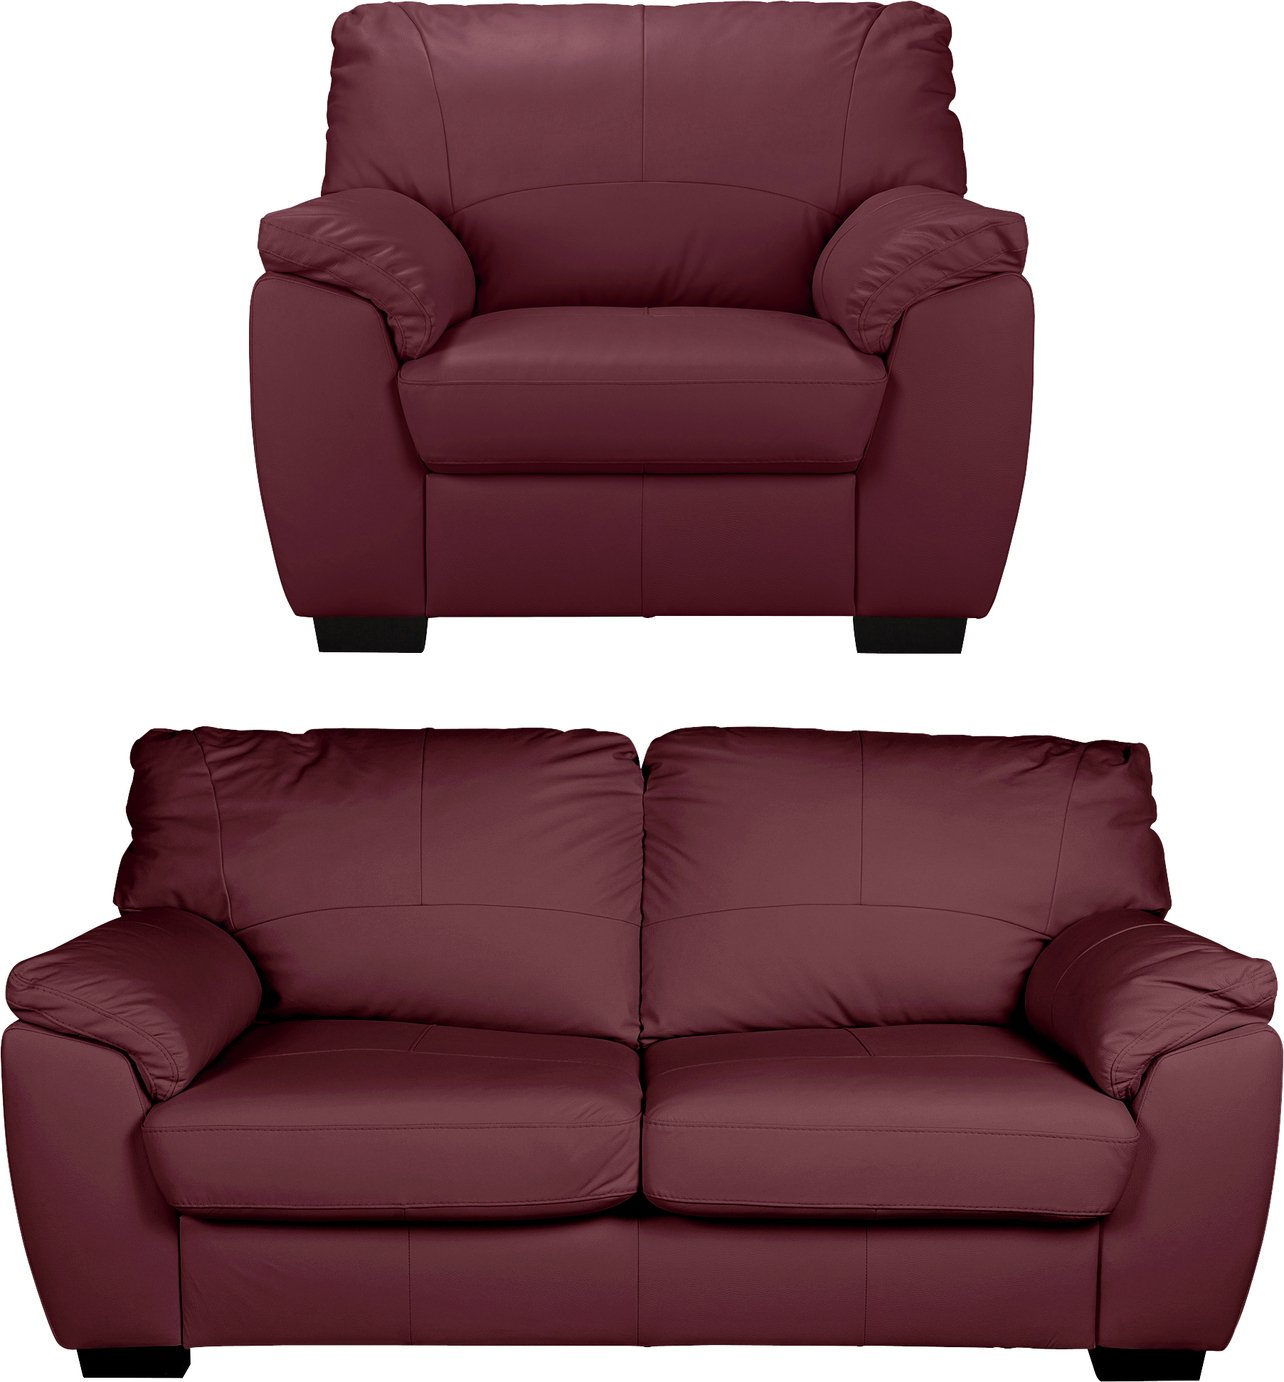 Argos Home Milano Leather Chair and 3 Seater Sofa - Burgundy